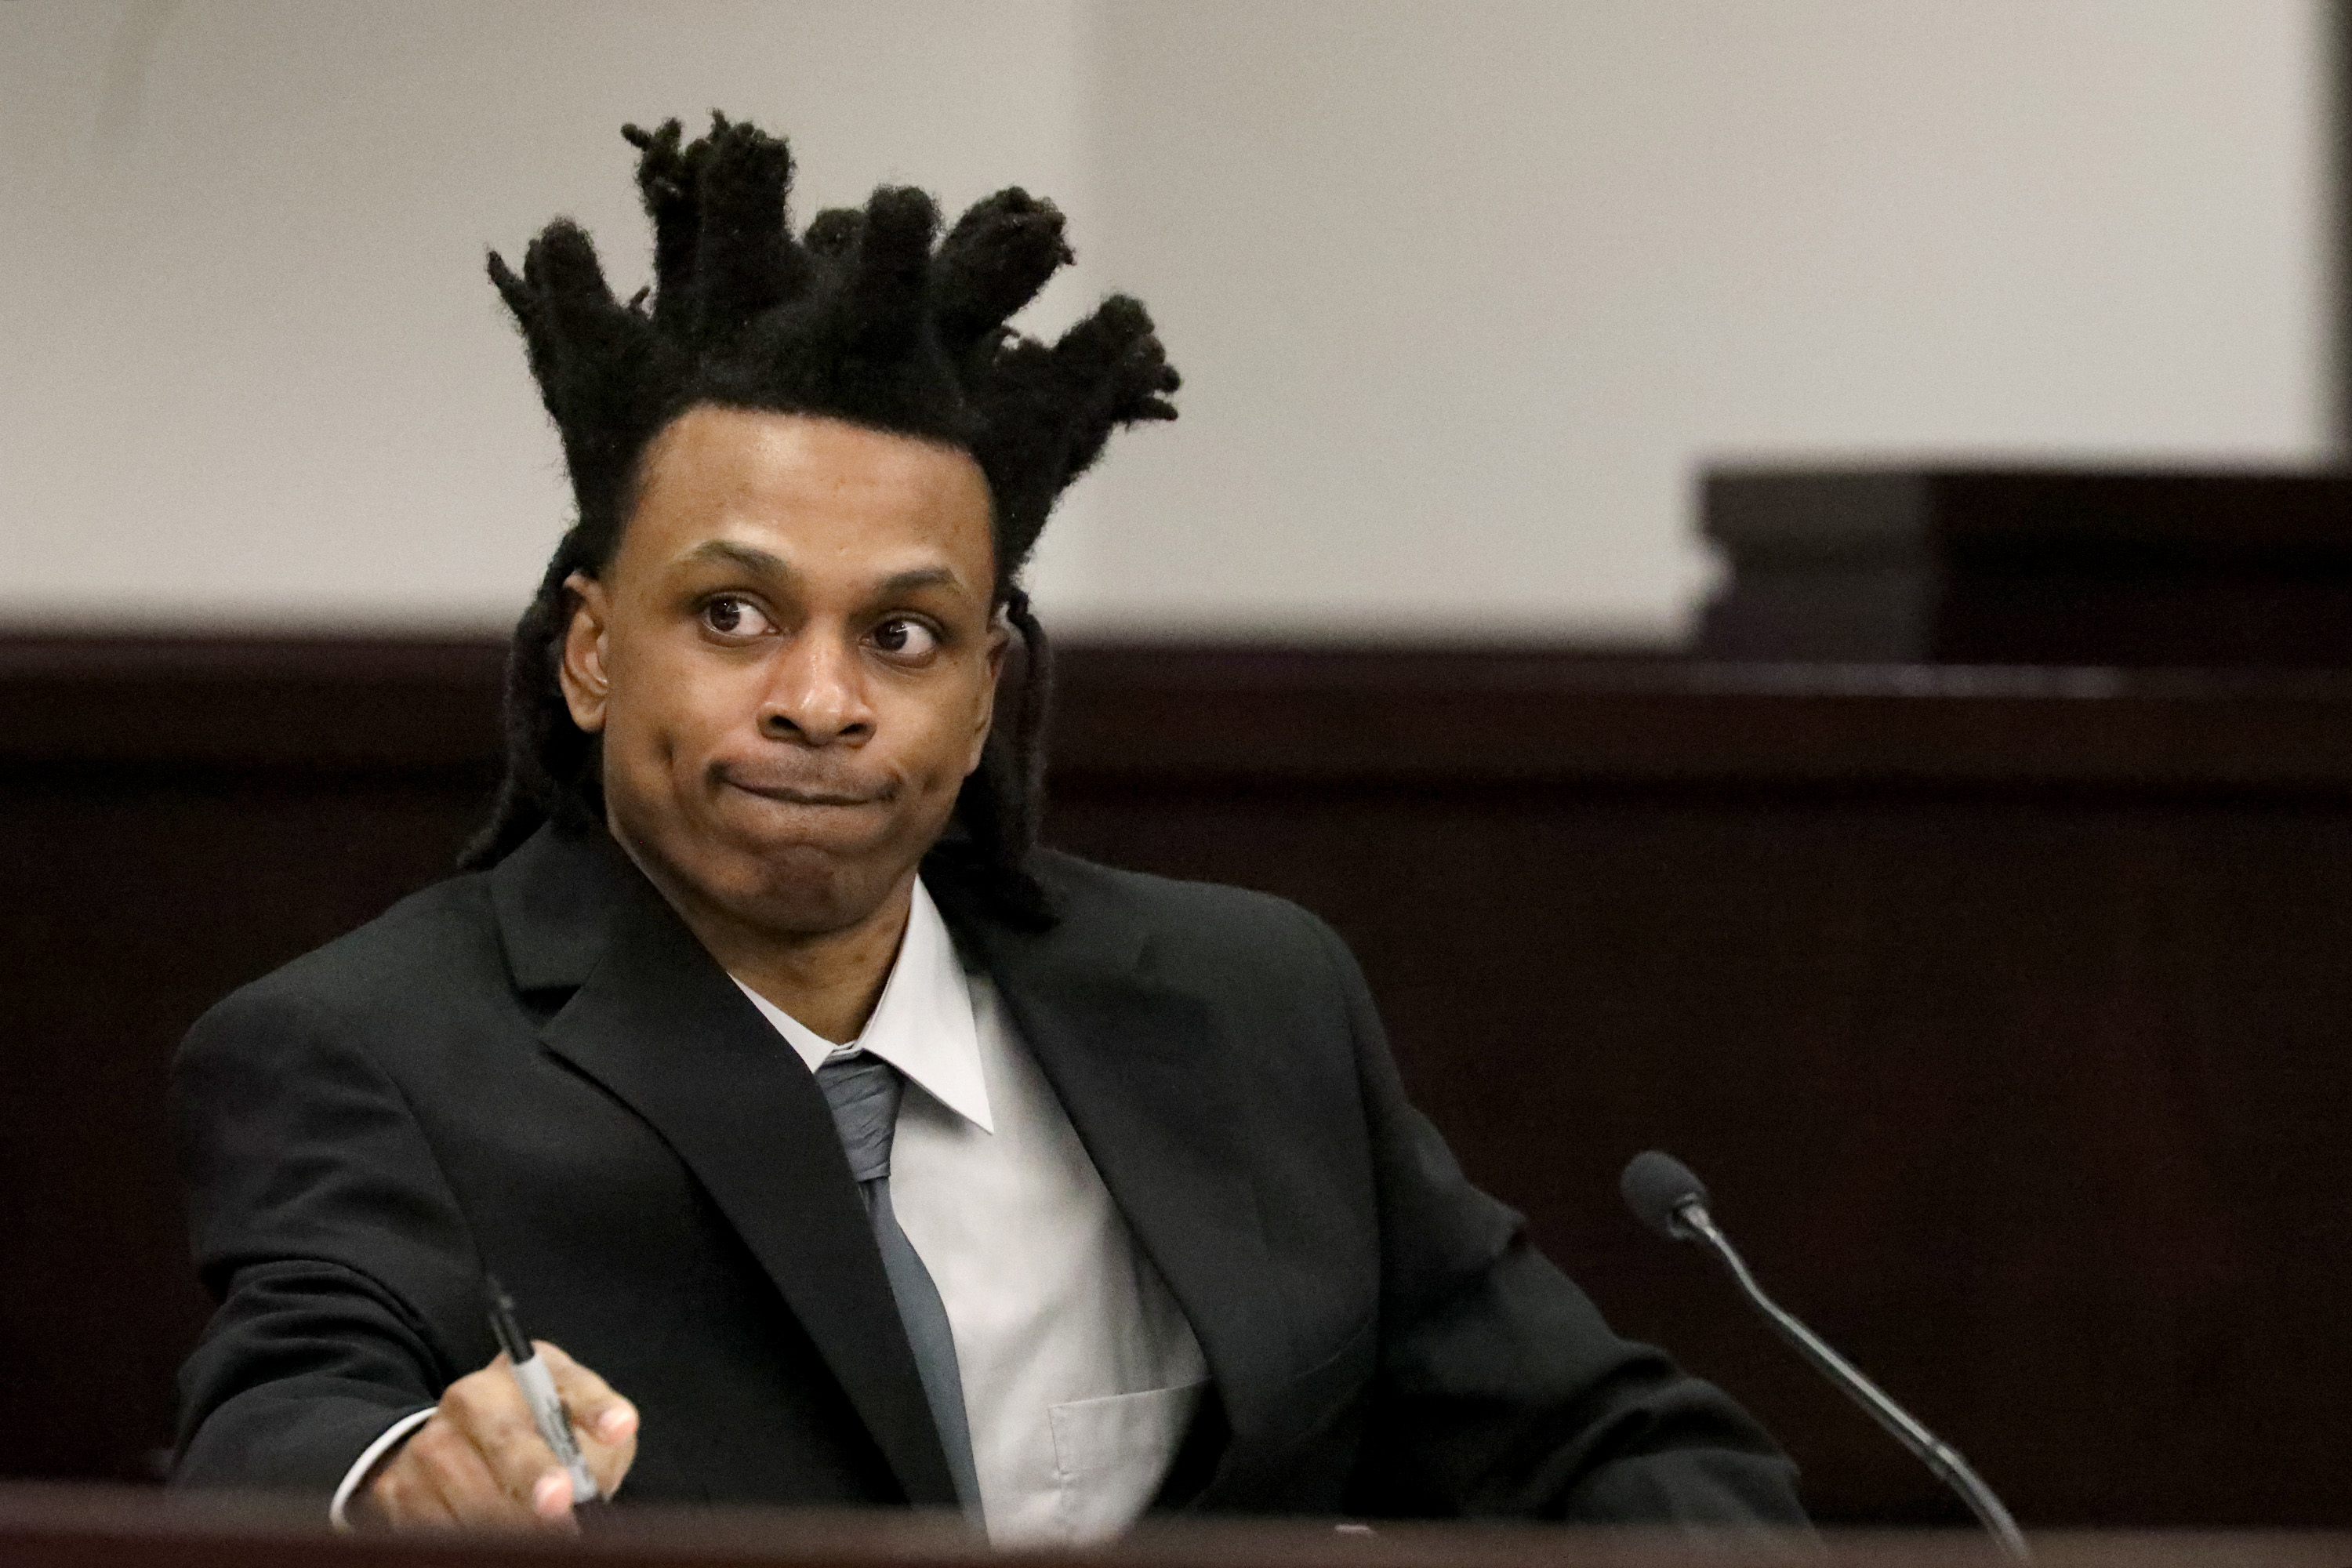 With Death On The Table Man Begins His Defense In Tampa Murder Trial